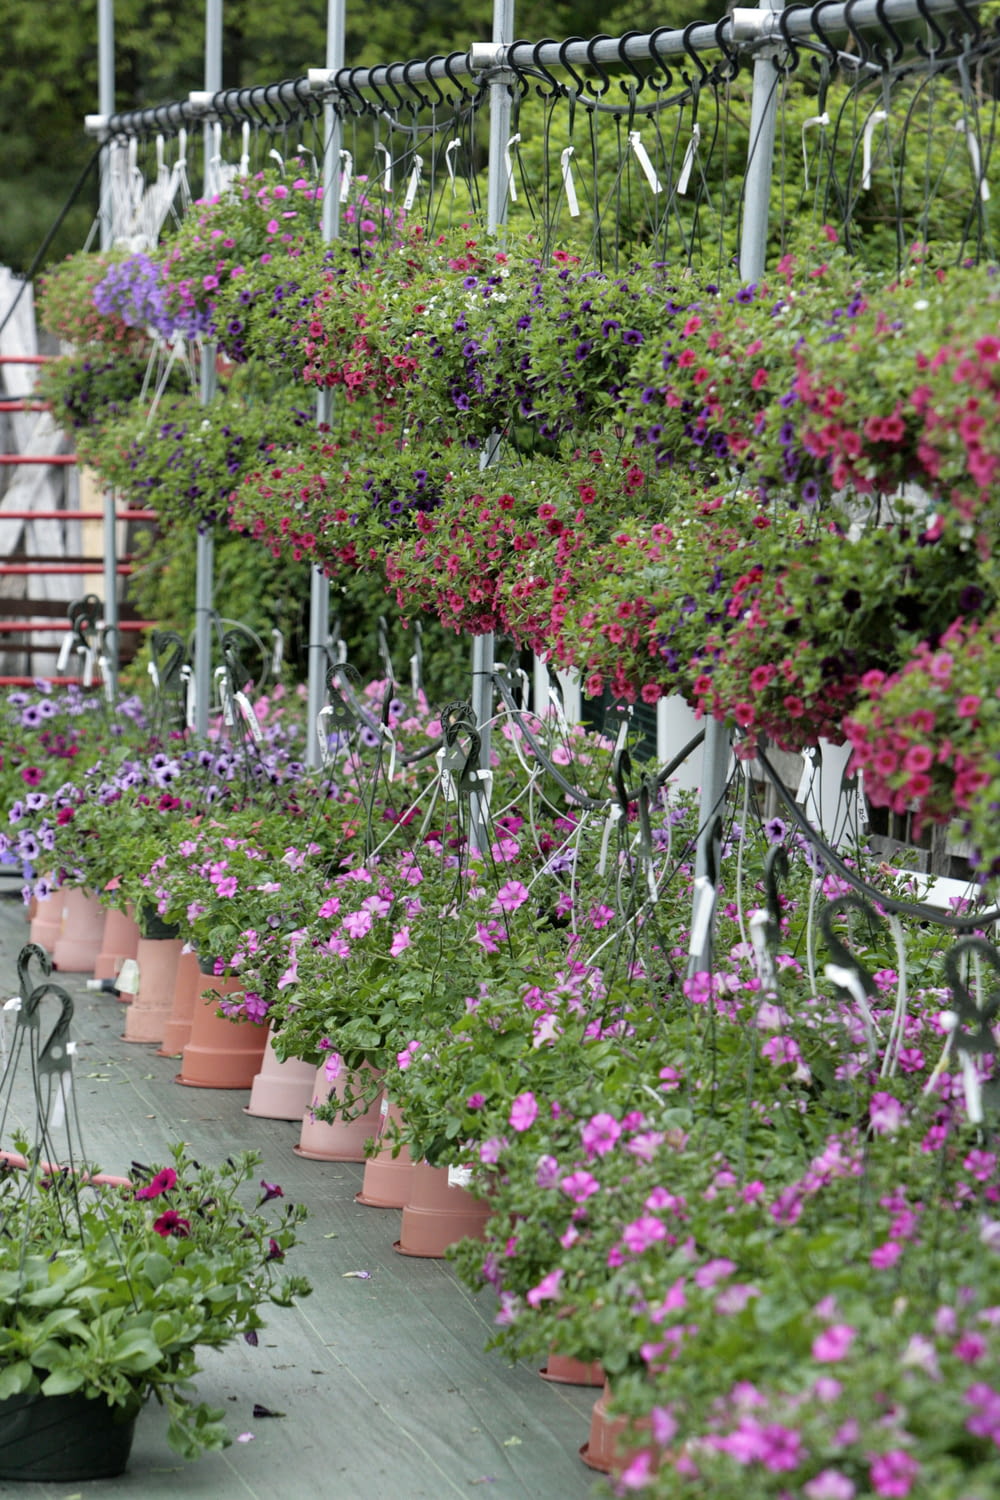 a row of potted plants with pink and purple flowers